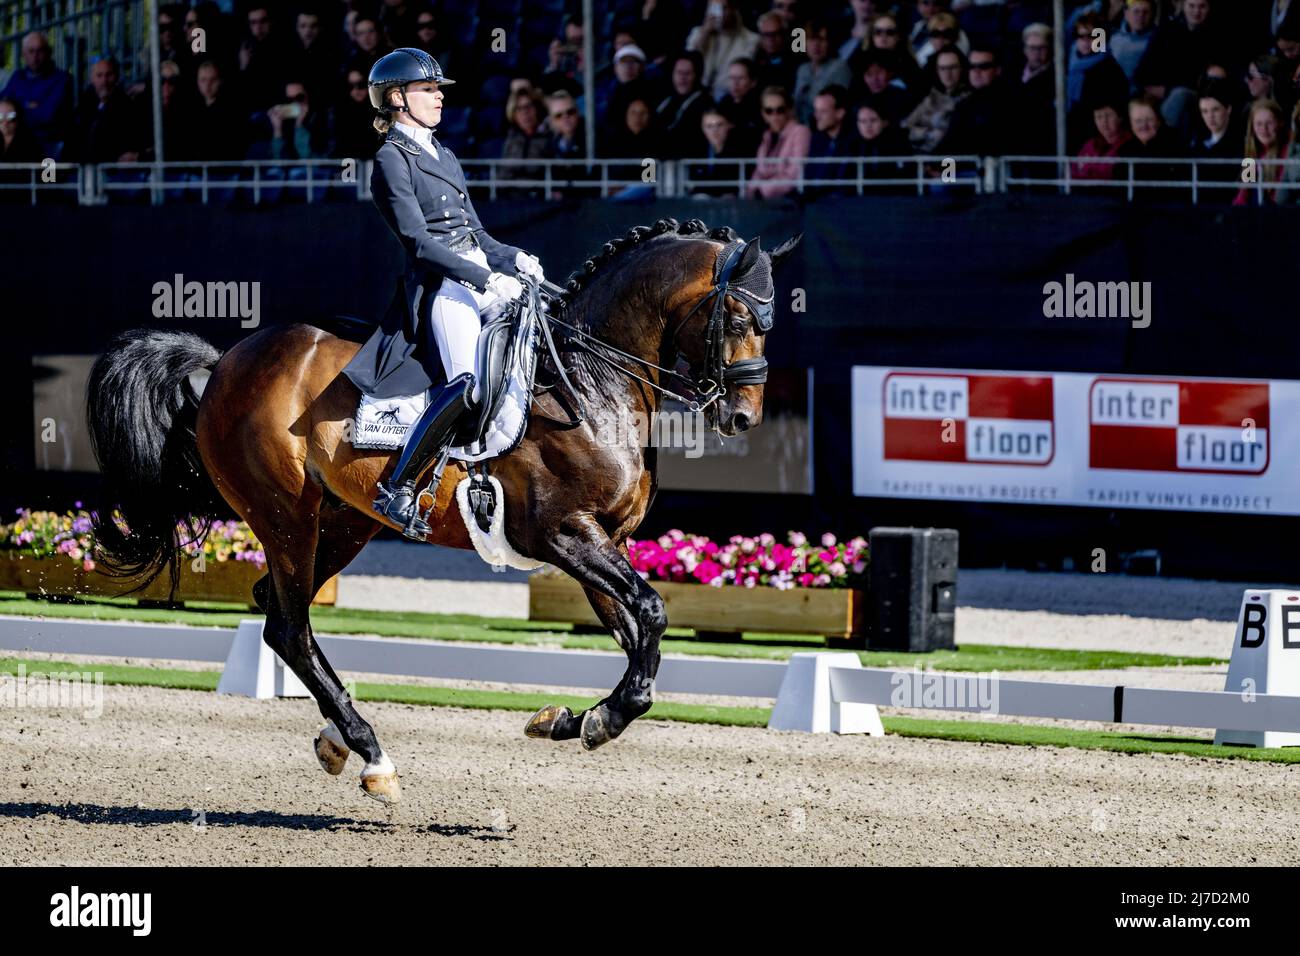 2022-05-08 17:00:45 ERMELO - Dinja van Liere and Hermès became champion during the Dutch dressage championship. ANP ROBIN UTRECHT netherlands out - belgium out Stock Photo